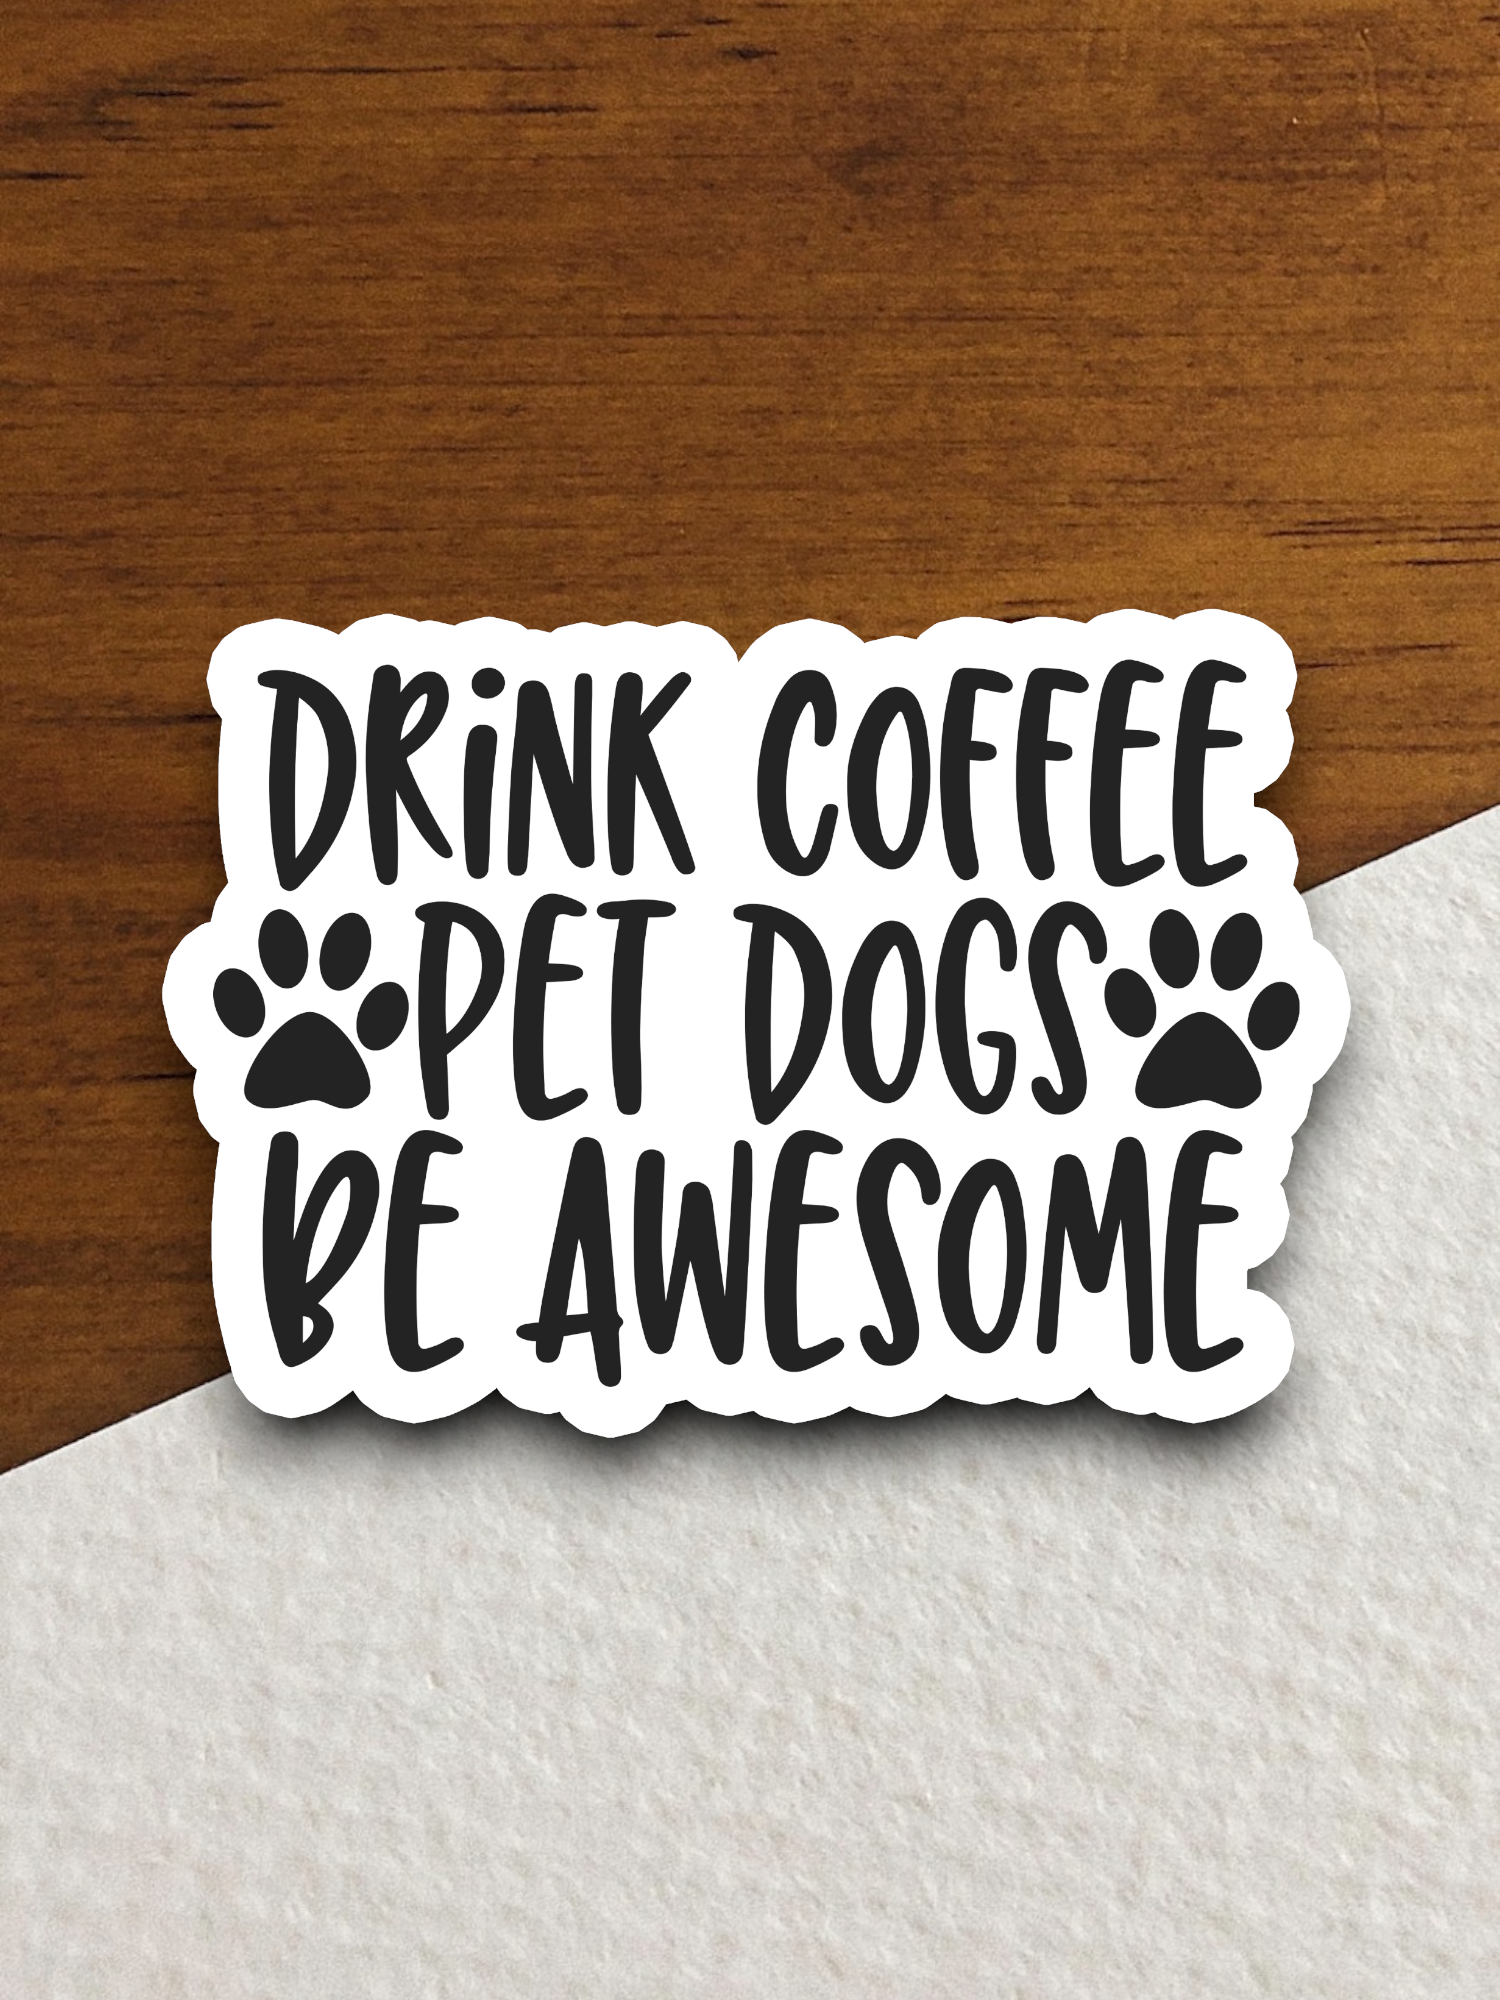 Drink Coffee Pet Dogs Be Awesome - Coffee Sticker